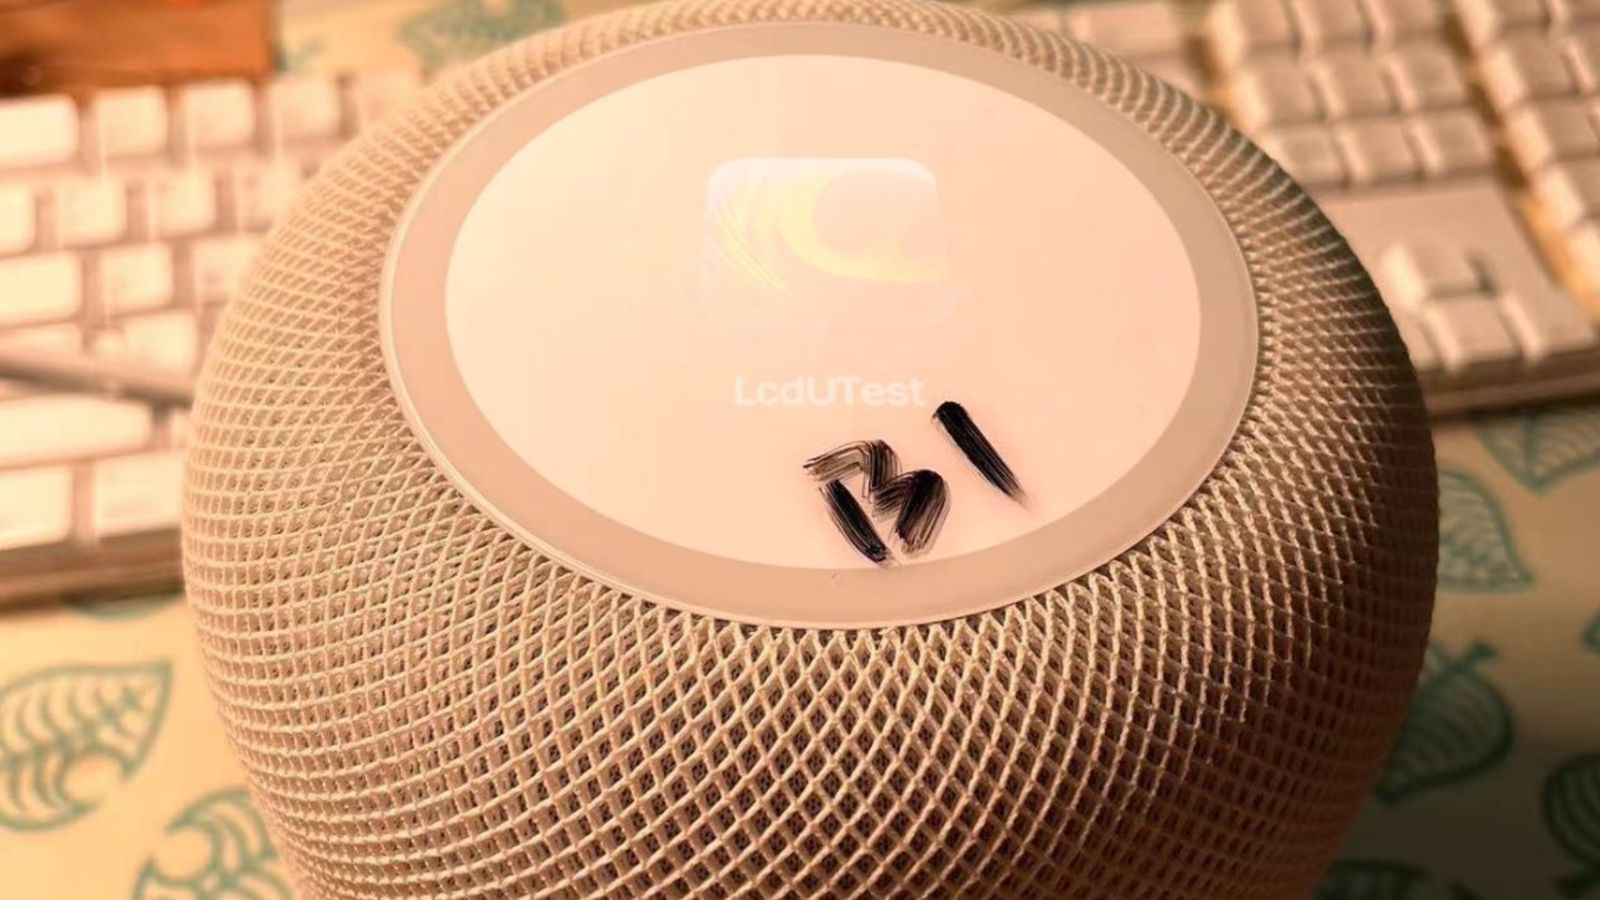 Unreleased HomePod With LCD Display Allegedly Shown in Images 